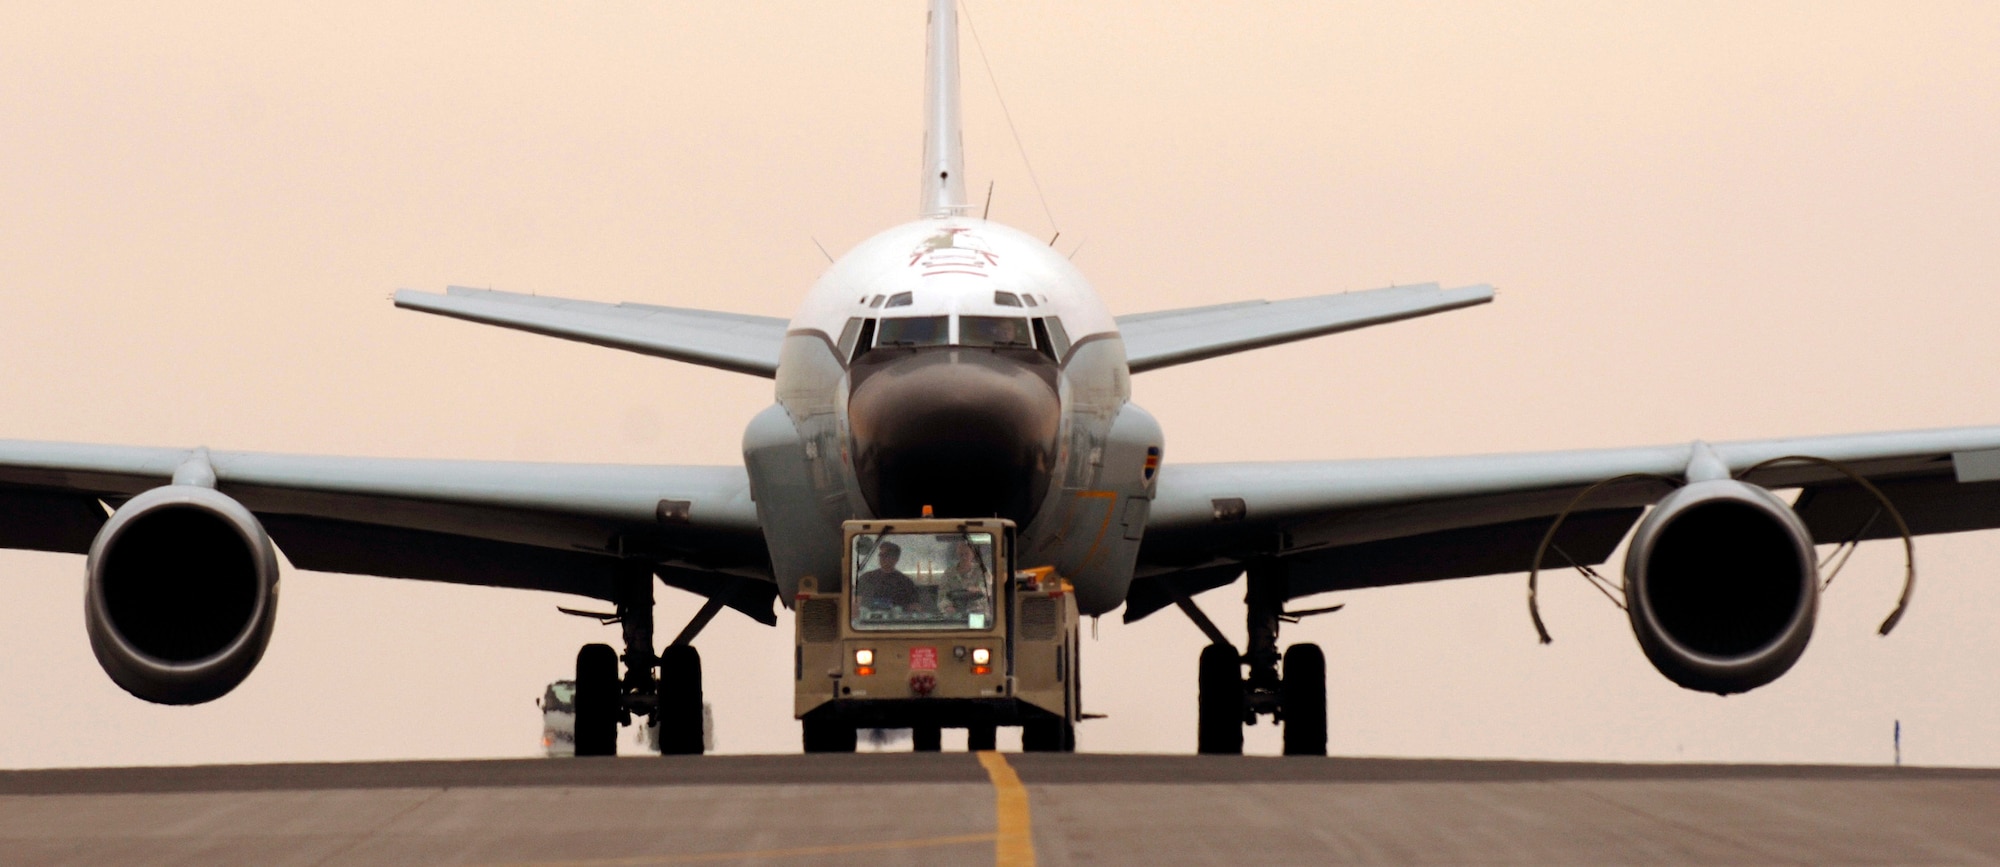 An RC-135 Rivet Joint reconnaissance aircraft is towed by Staff Sgt. John Terlaje and Airman 1st Class Ross Vandenbosch in Southwest Asia. The F108-model high bypass turbofan engine, introduced to the 135-airframe in August of 1998, has proven to be a reliable workhorse in transporting the heavy 275,000-pound intelligence and reconnaissance platform. Both crew chiefs are deployed from the 55th Aircraft Maintenance Squadron from Offutt Air Force Base, Neb. (U.S. Air Force photo/Master Sgt. Scott Wagers)
